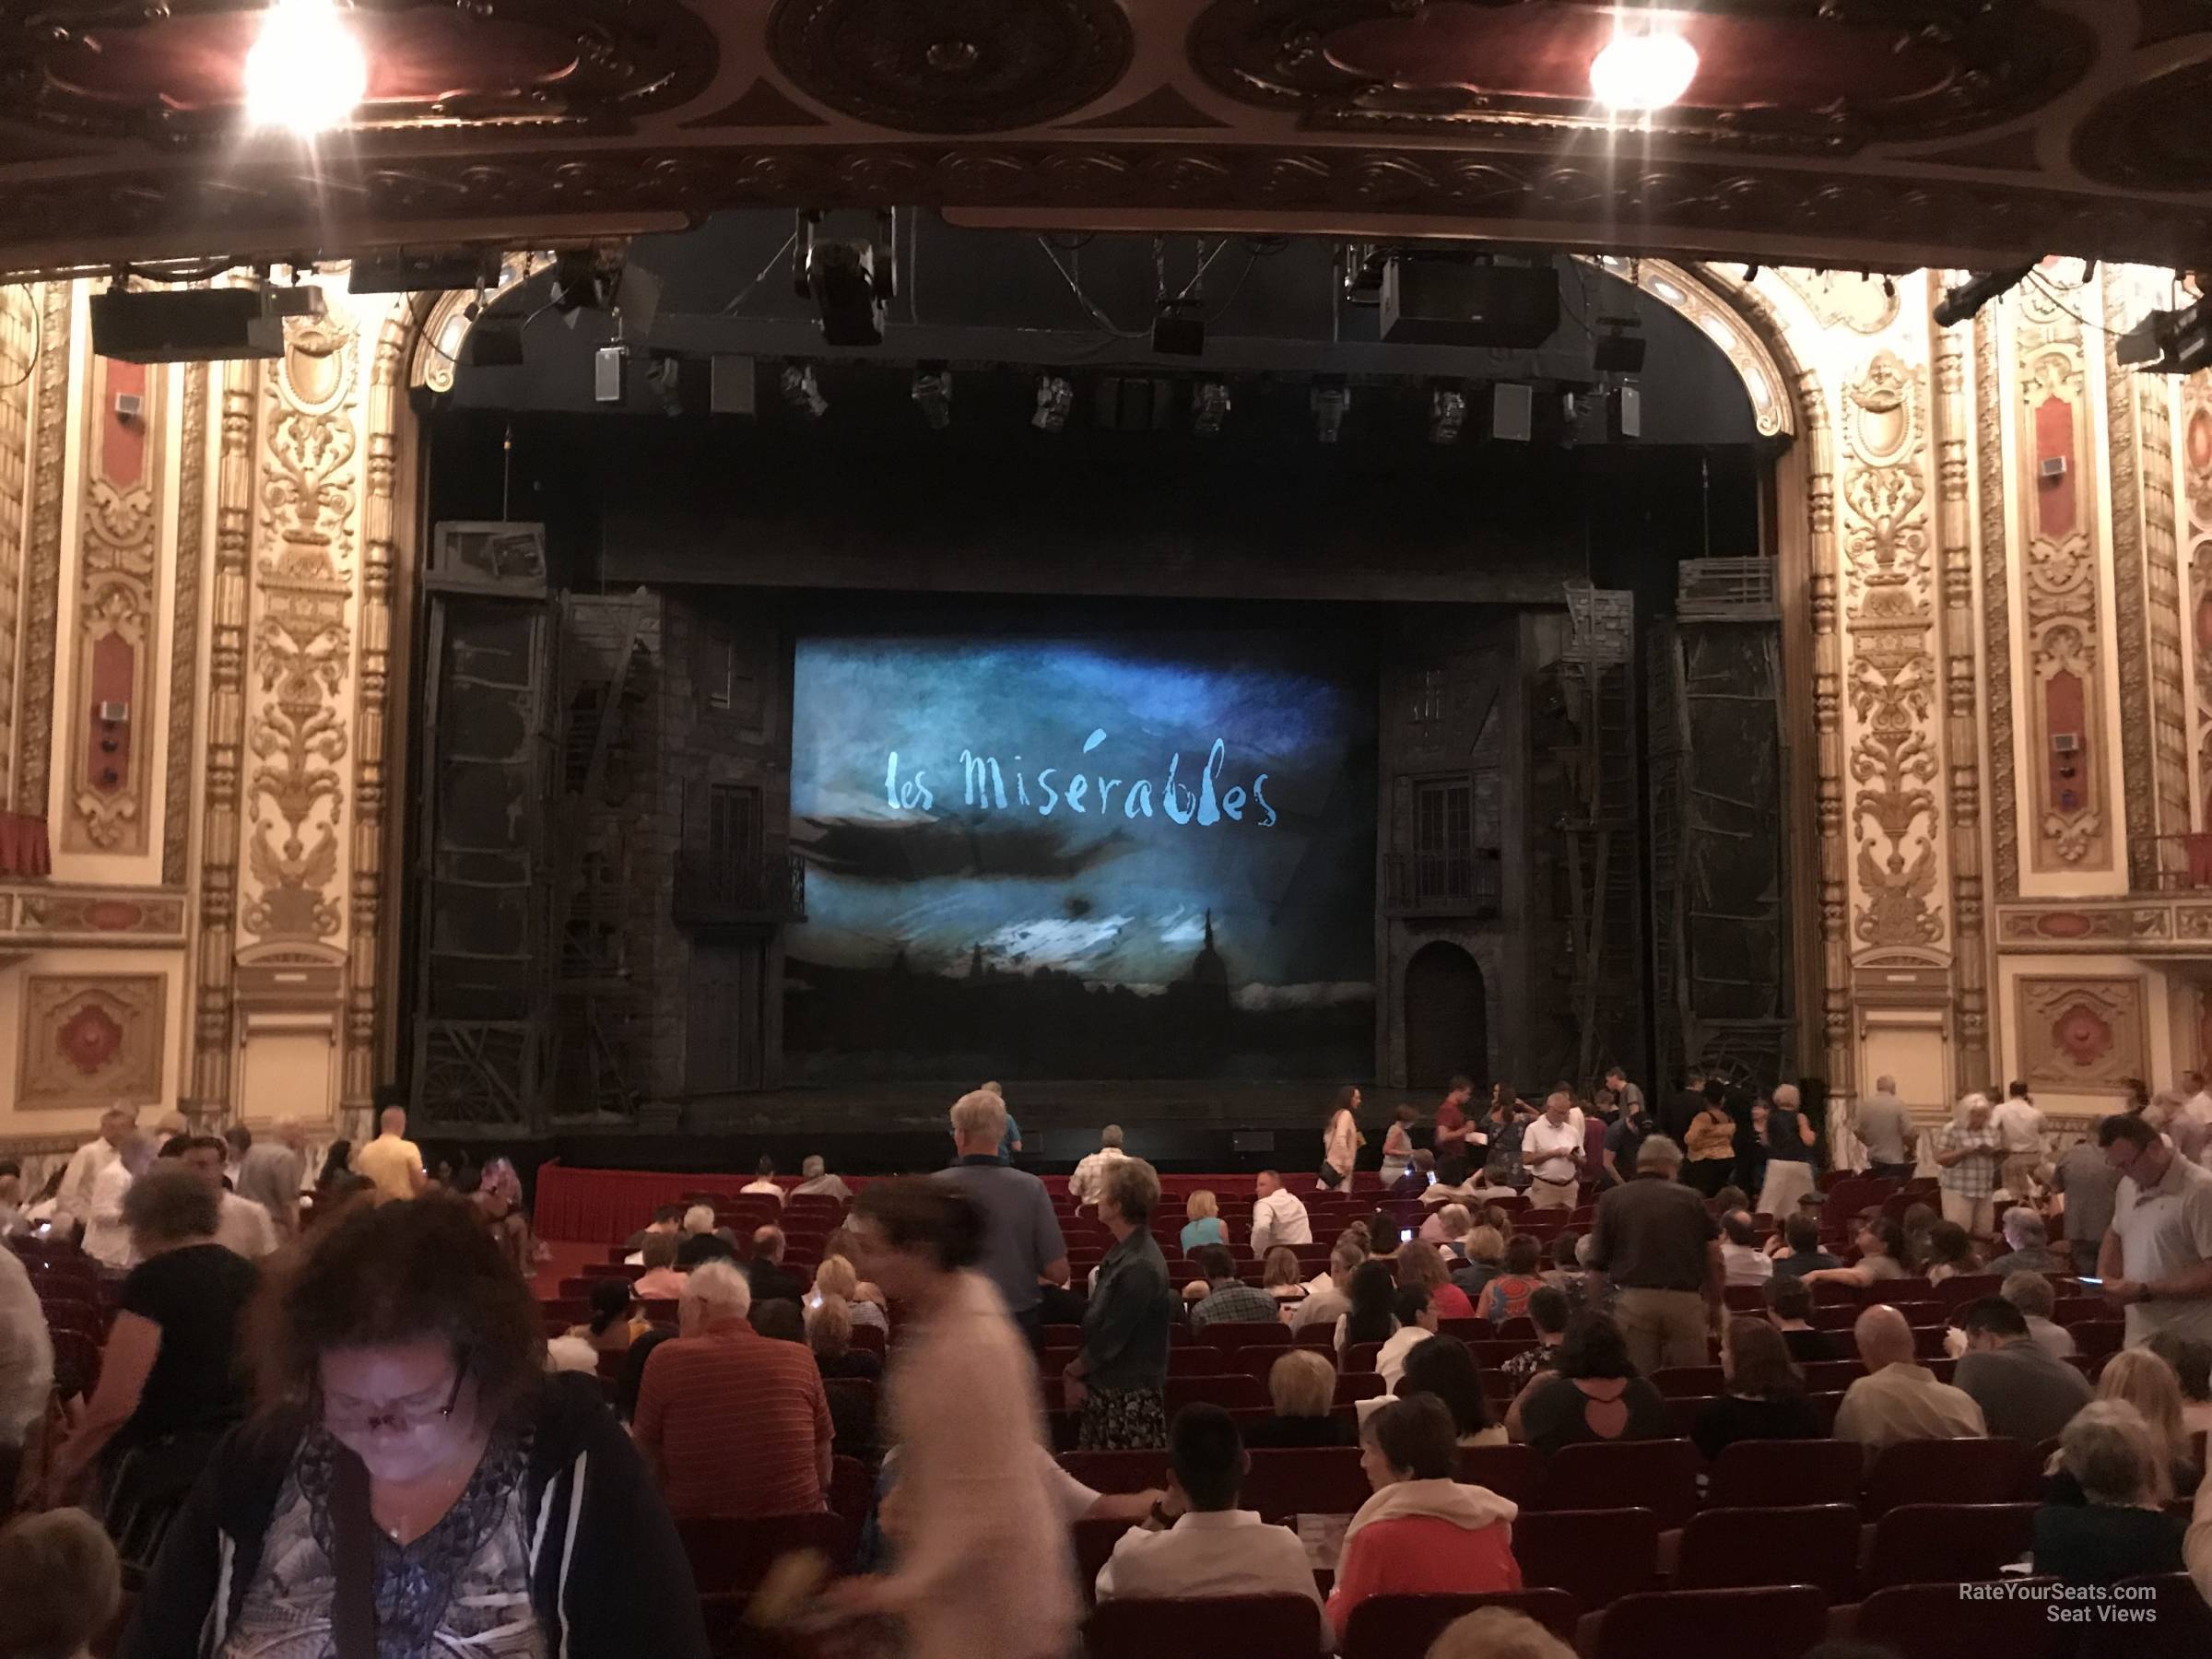 orchestra center, row x seat view  - cadillac palace theatre